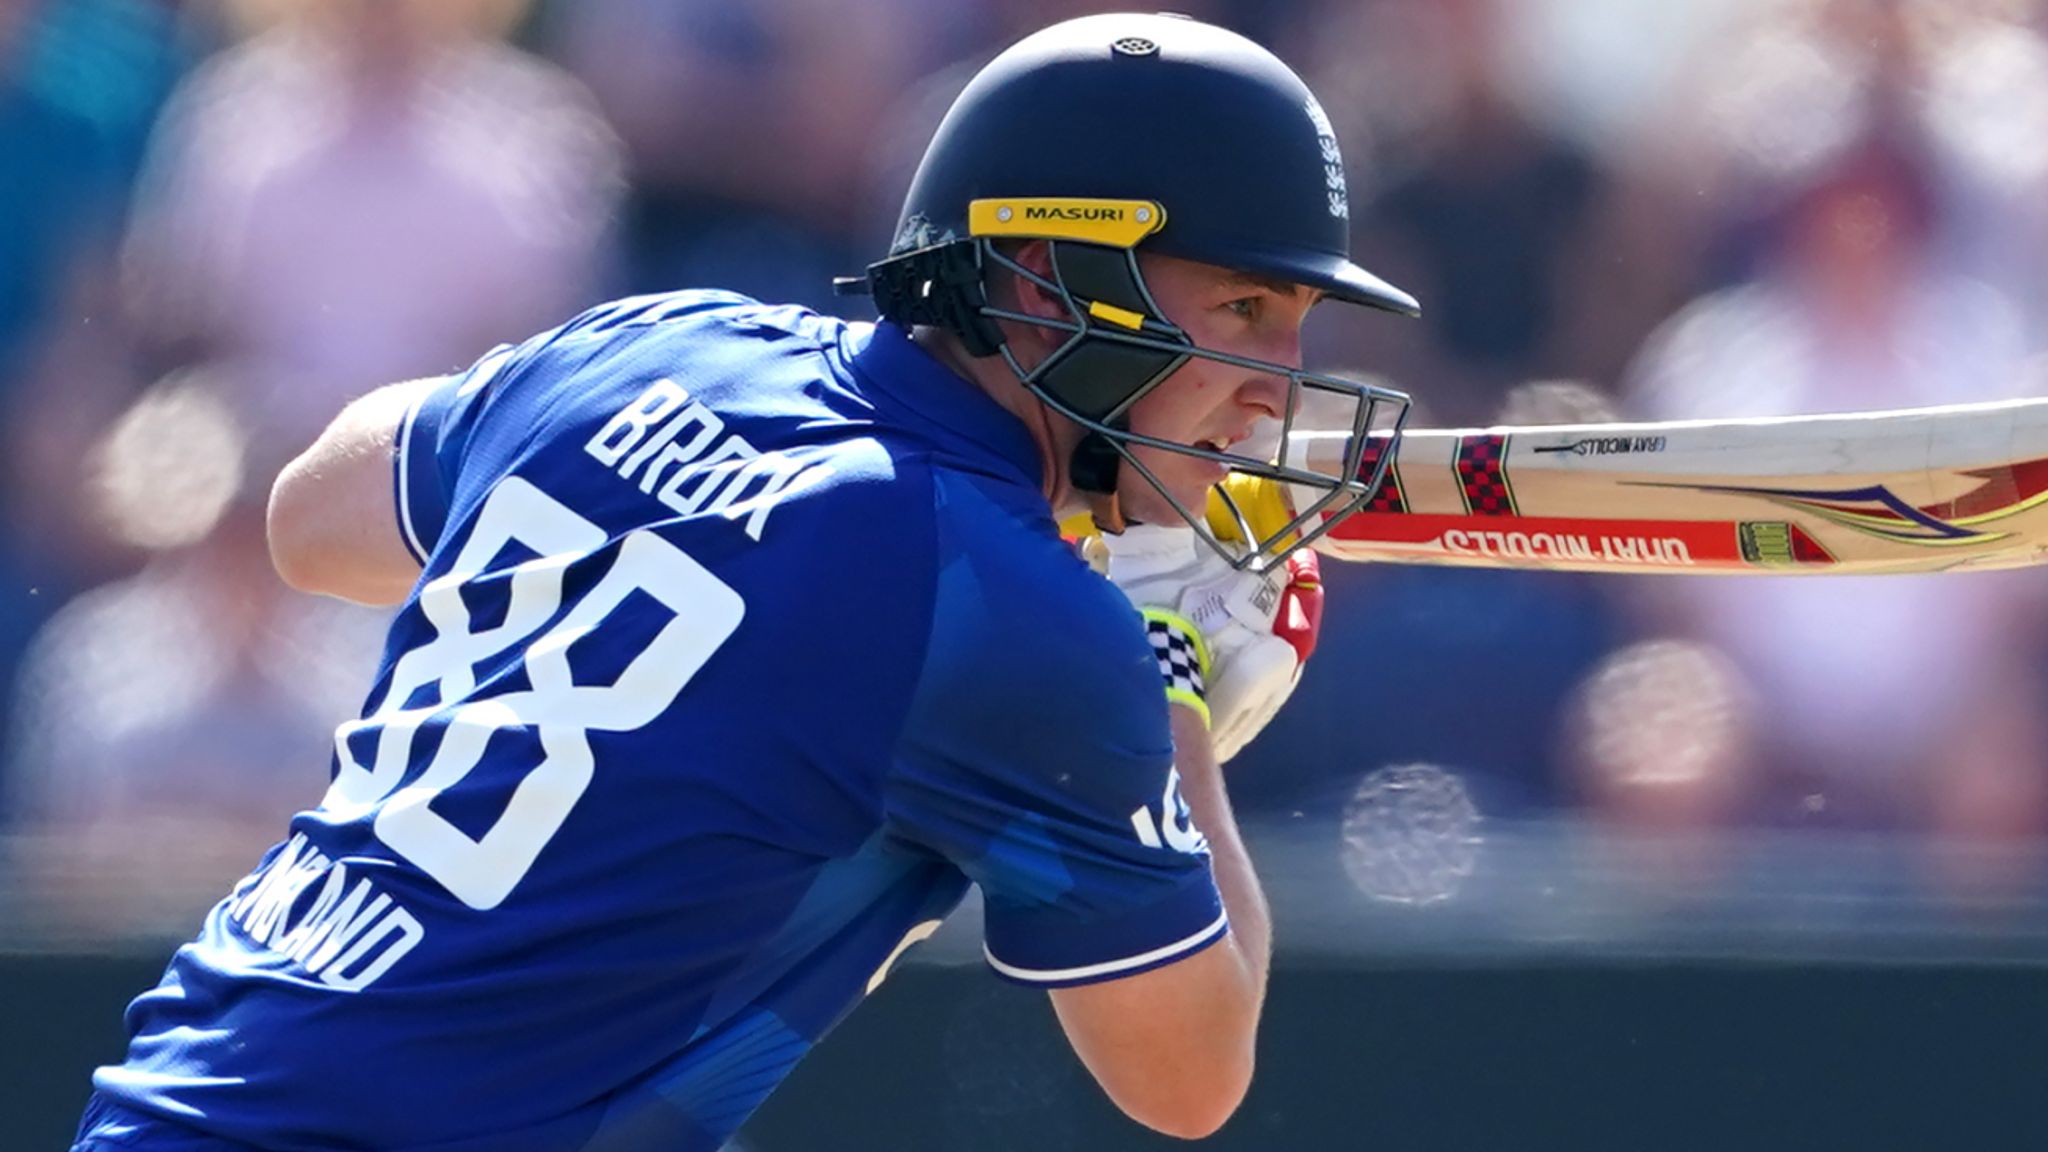 Cricket World Cup squads Which players are in India as England look to defend 50-over title? Cricket News Sky Sports